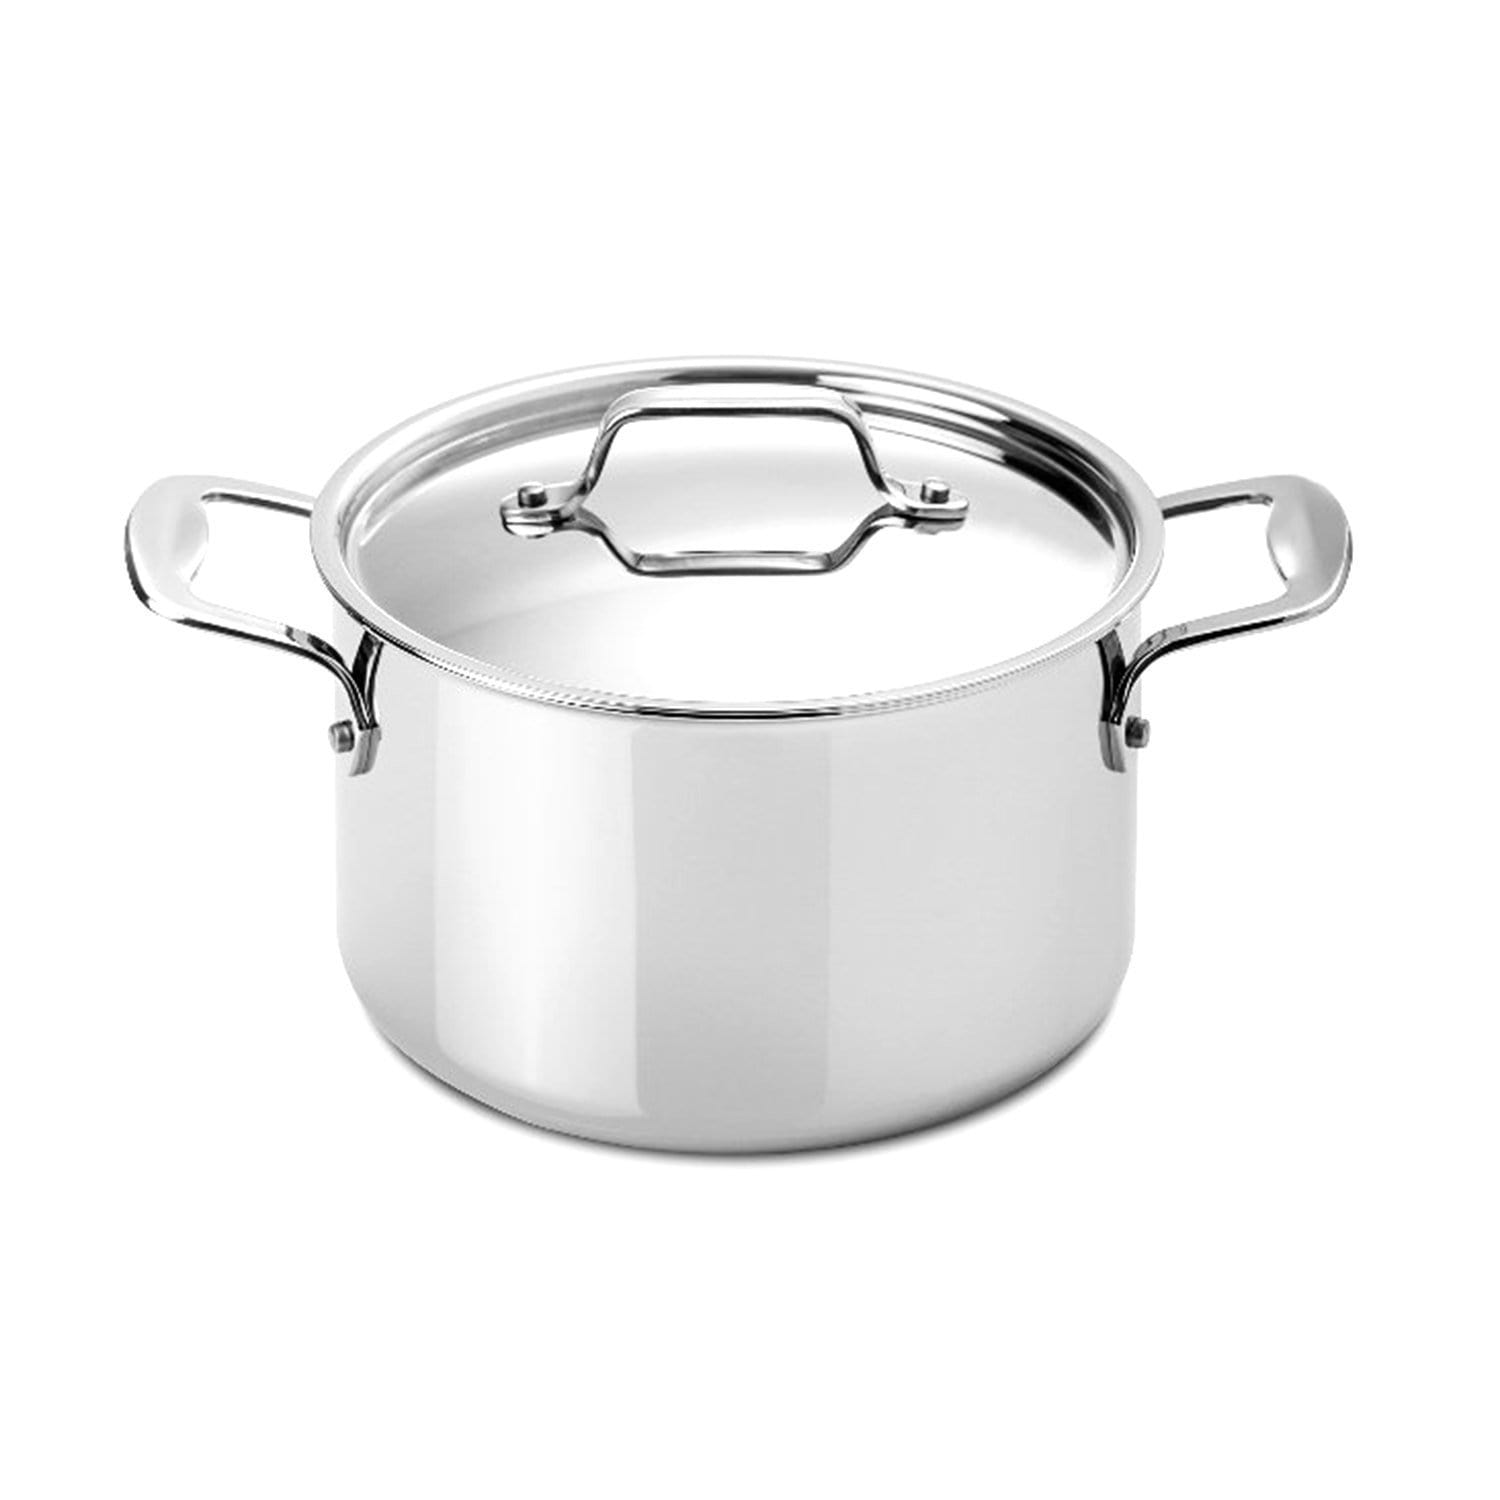 Silampos Supremeprof Stockpot with Lid - Silver, 24 cm - 639002BG6624 - Jashanmal Home